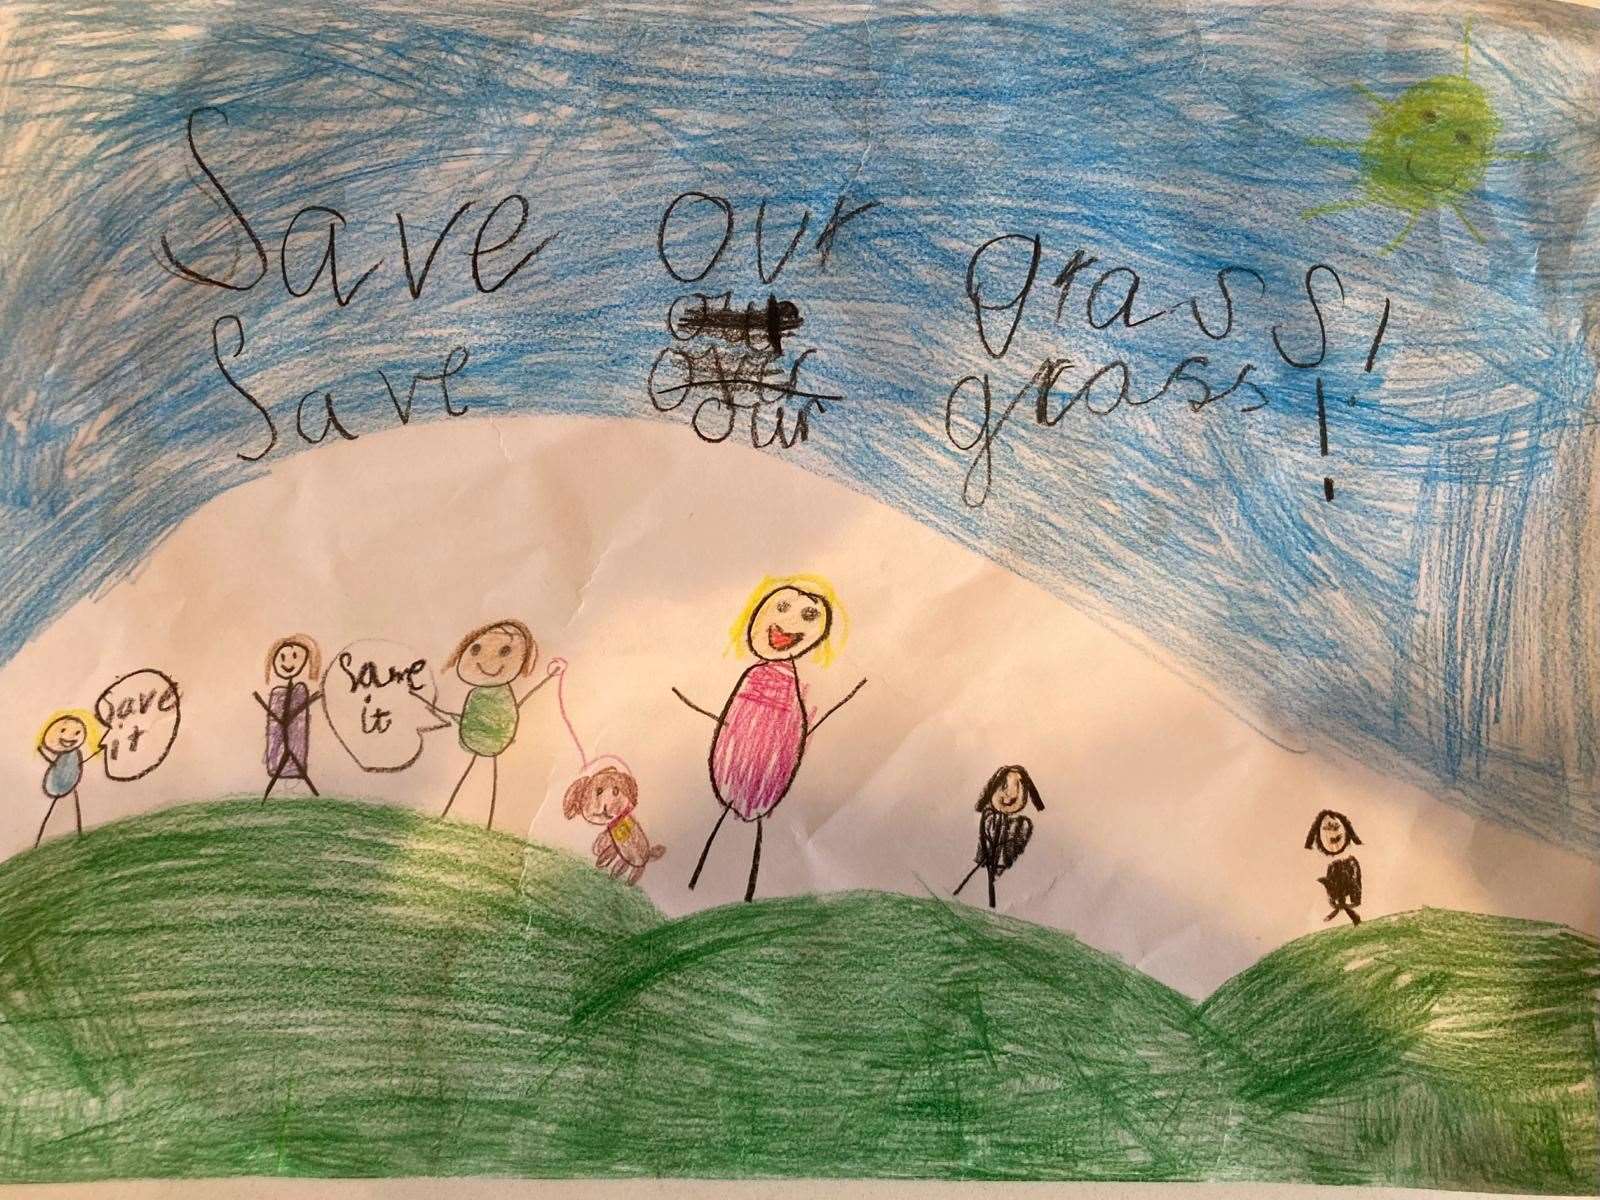 Save Our Grass - the clear message from children who use the green space